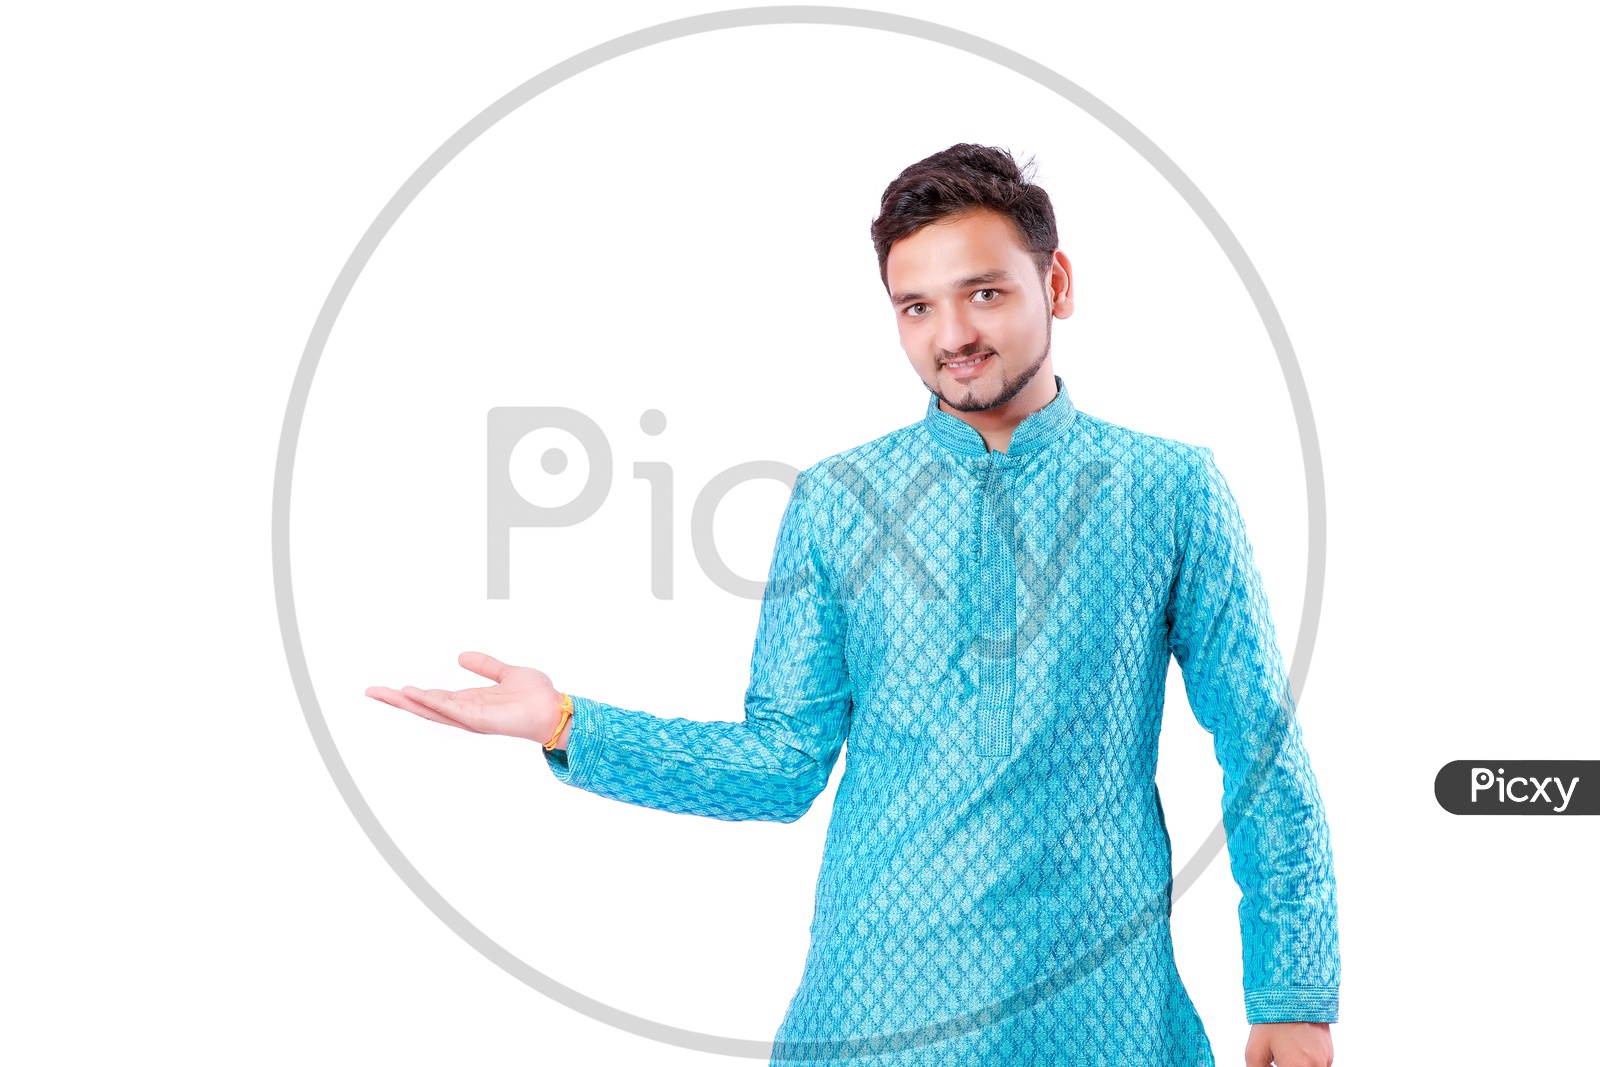 Indian Young Professional Man With a Smiling Face and Doing Gestures  to Space On an Isolated White Background